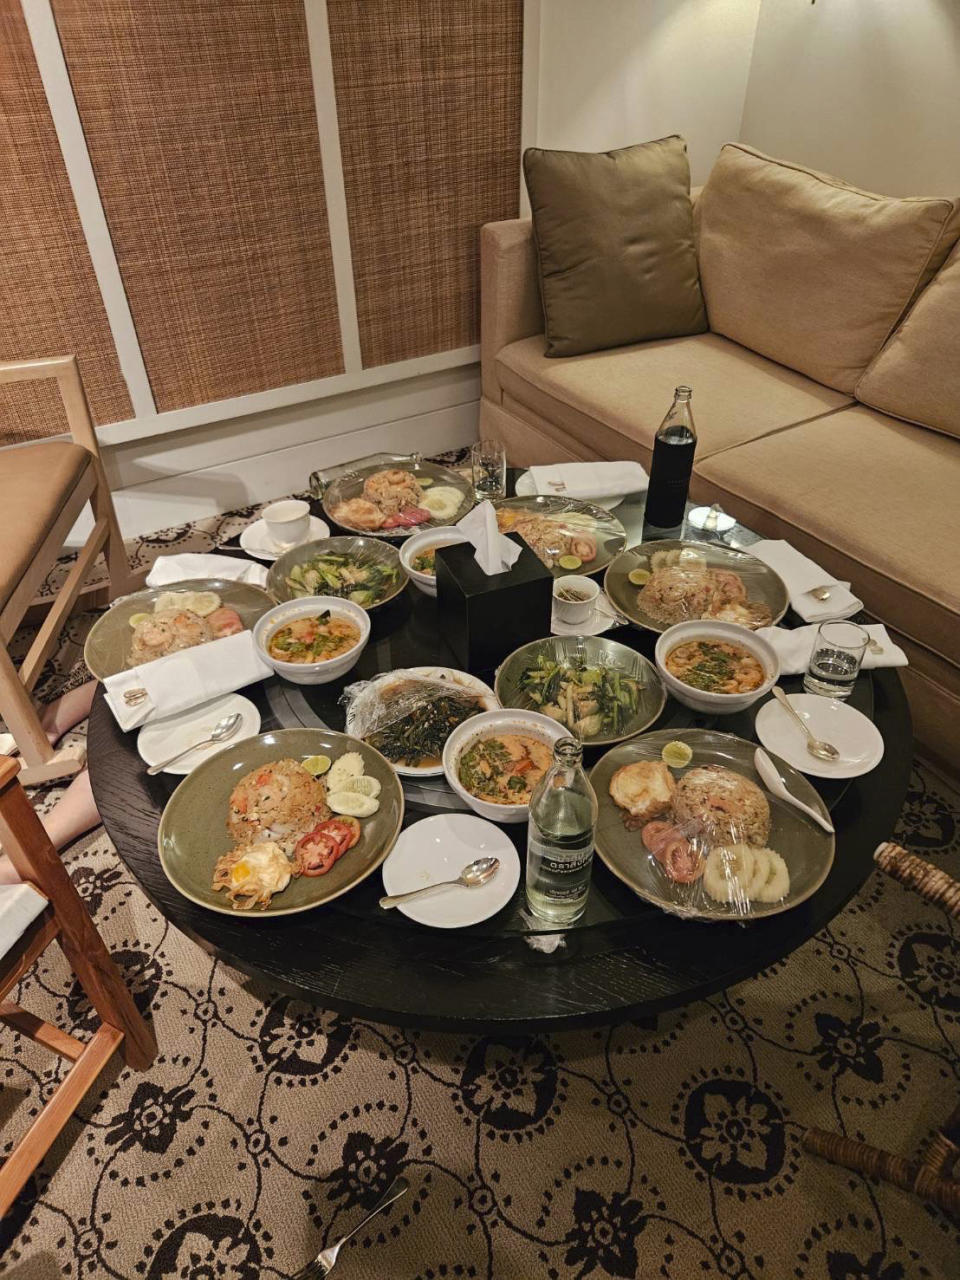 In this photo released by the Royal Thai Police, uneaten meals are left on a table in a room in the Grand Hyatt Erawan Hotel room where six people were found dead from unknown causes, Tuesday, July 16, 2024. Police said the dead in a rooms at Bangkok's Grand Hyatt Hotel were two Vietnamese Americans and four Vietnamese nationals, and speculated they might have died from some kind of poisoning. (Royal Thai Police via AP)